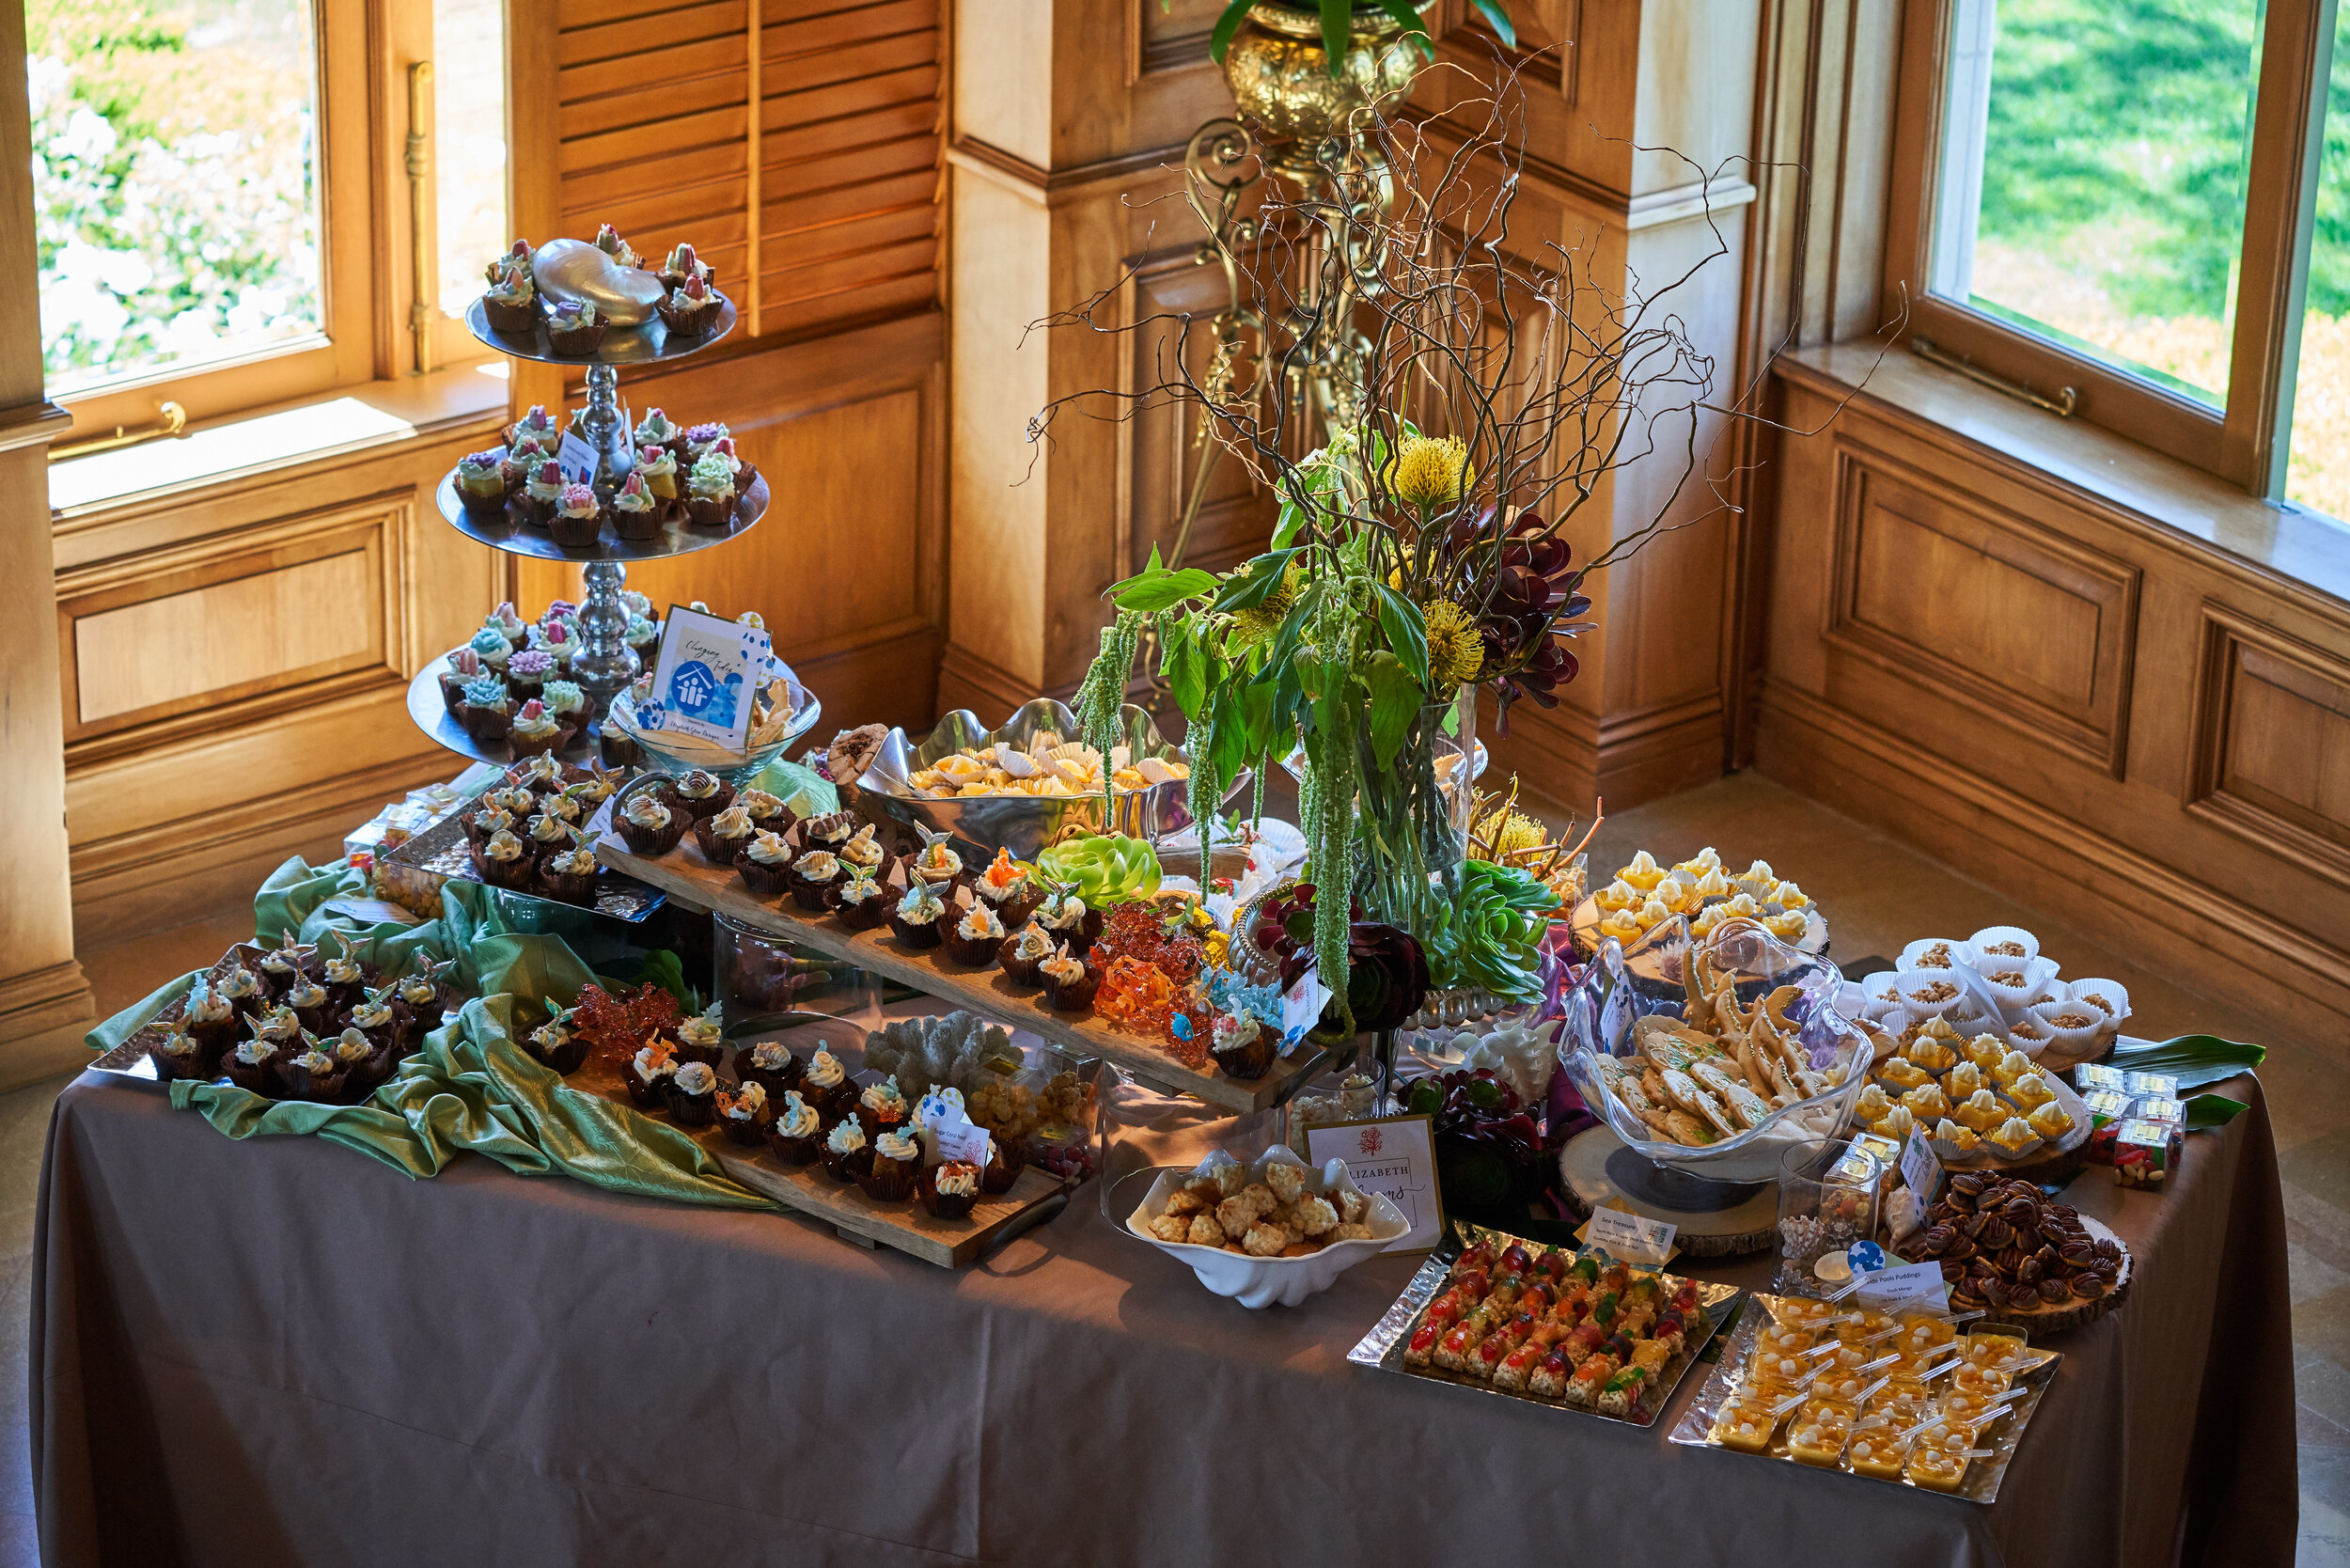 A variety of desserts are displayed on a table.